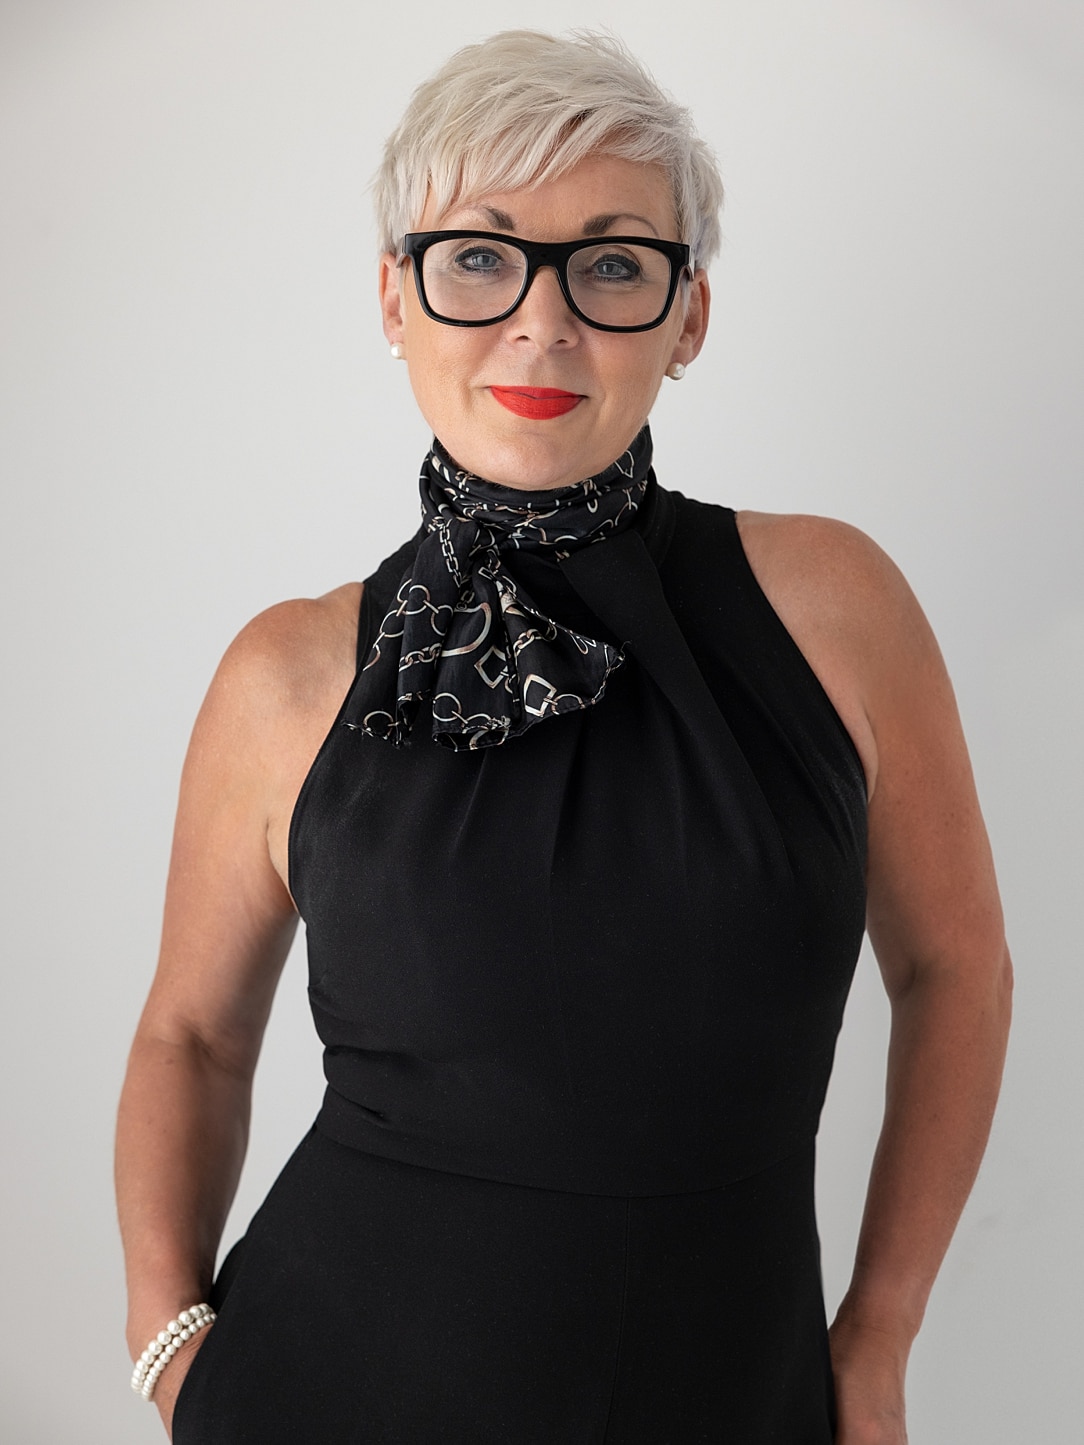 Personal Branding Portrait of lady with short blond hair and black jumpsuit on black background